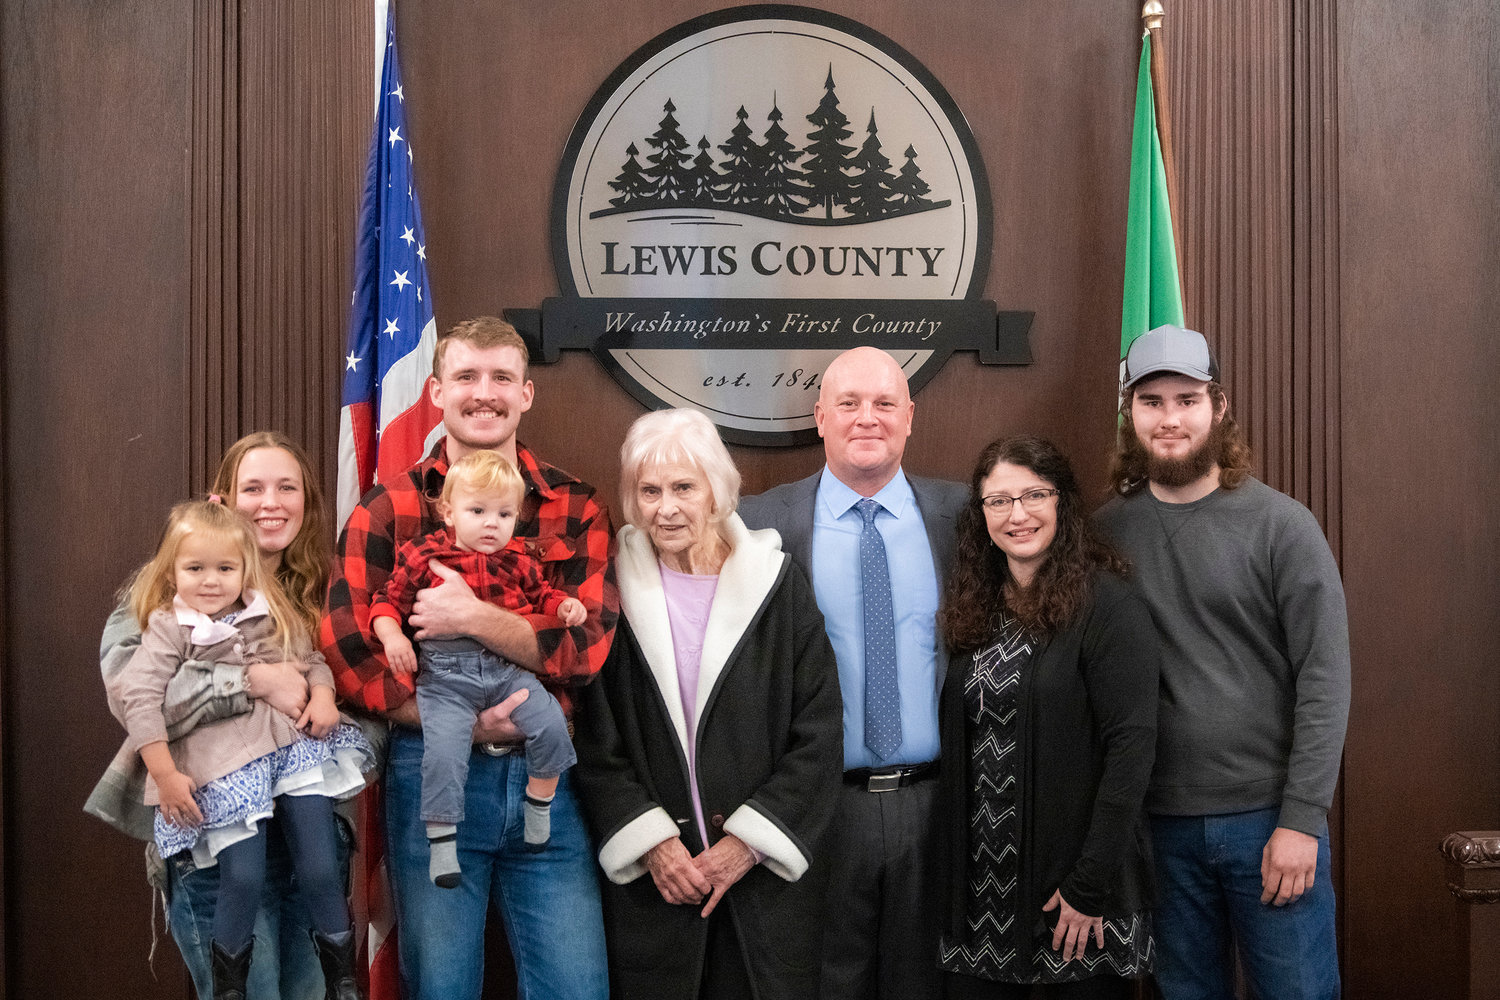 Scott Brummer smiles for a photo with family after being sworn in as the Lewis County District 3 commissioner Wednesday morning in Chehalis.